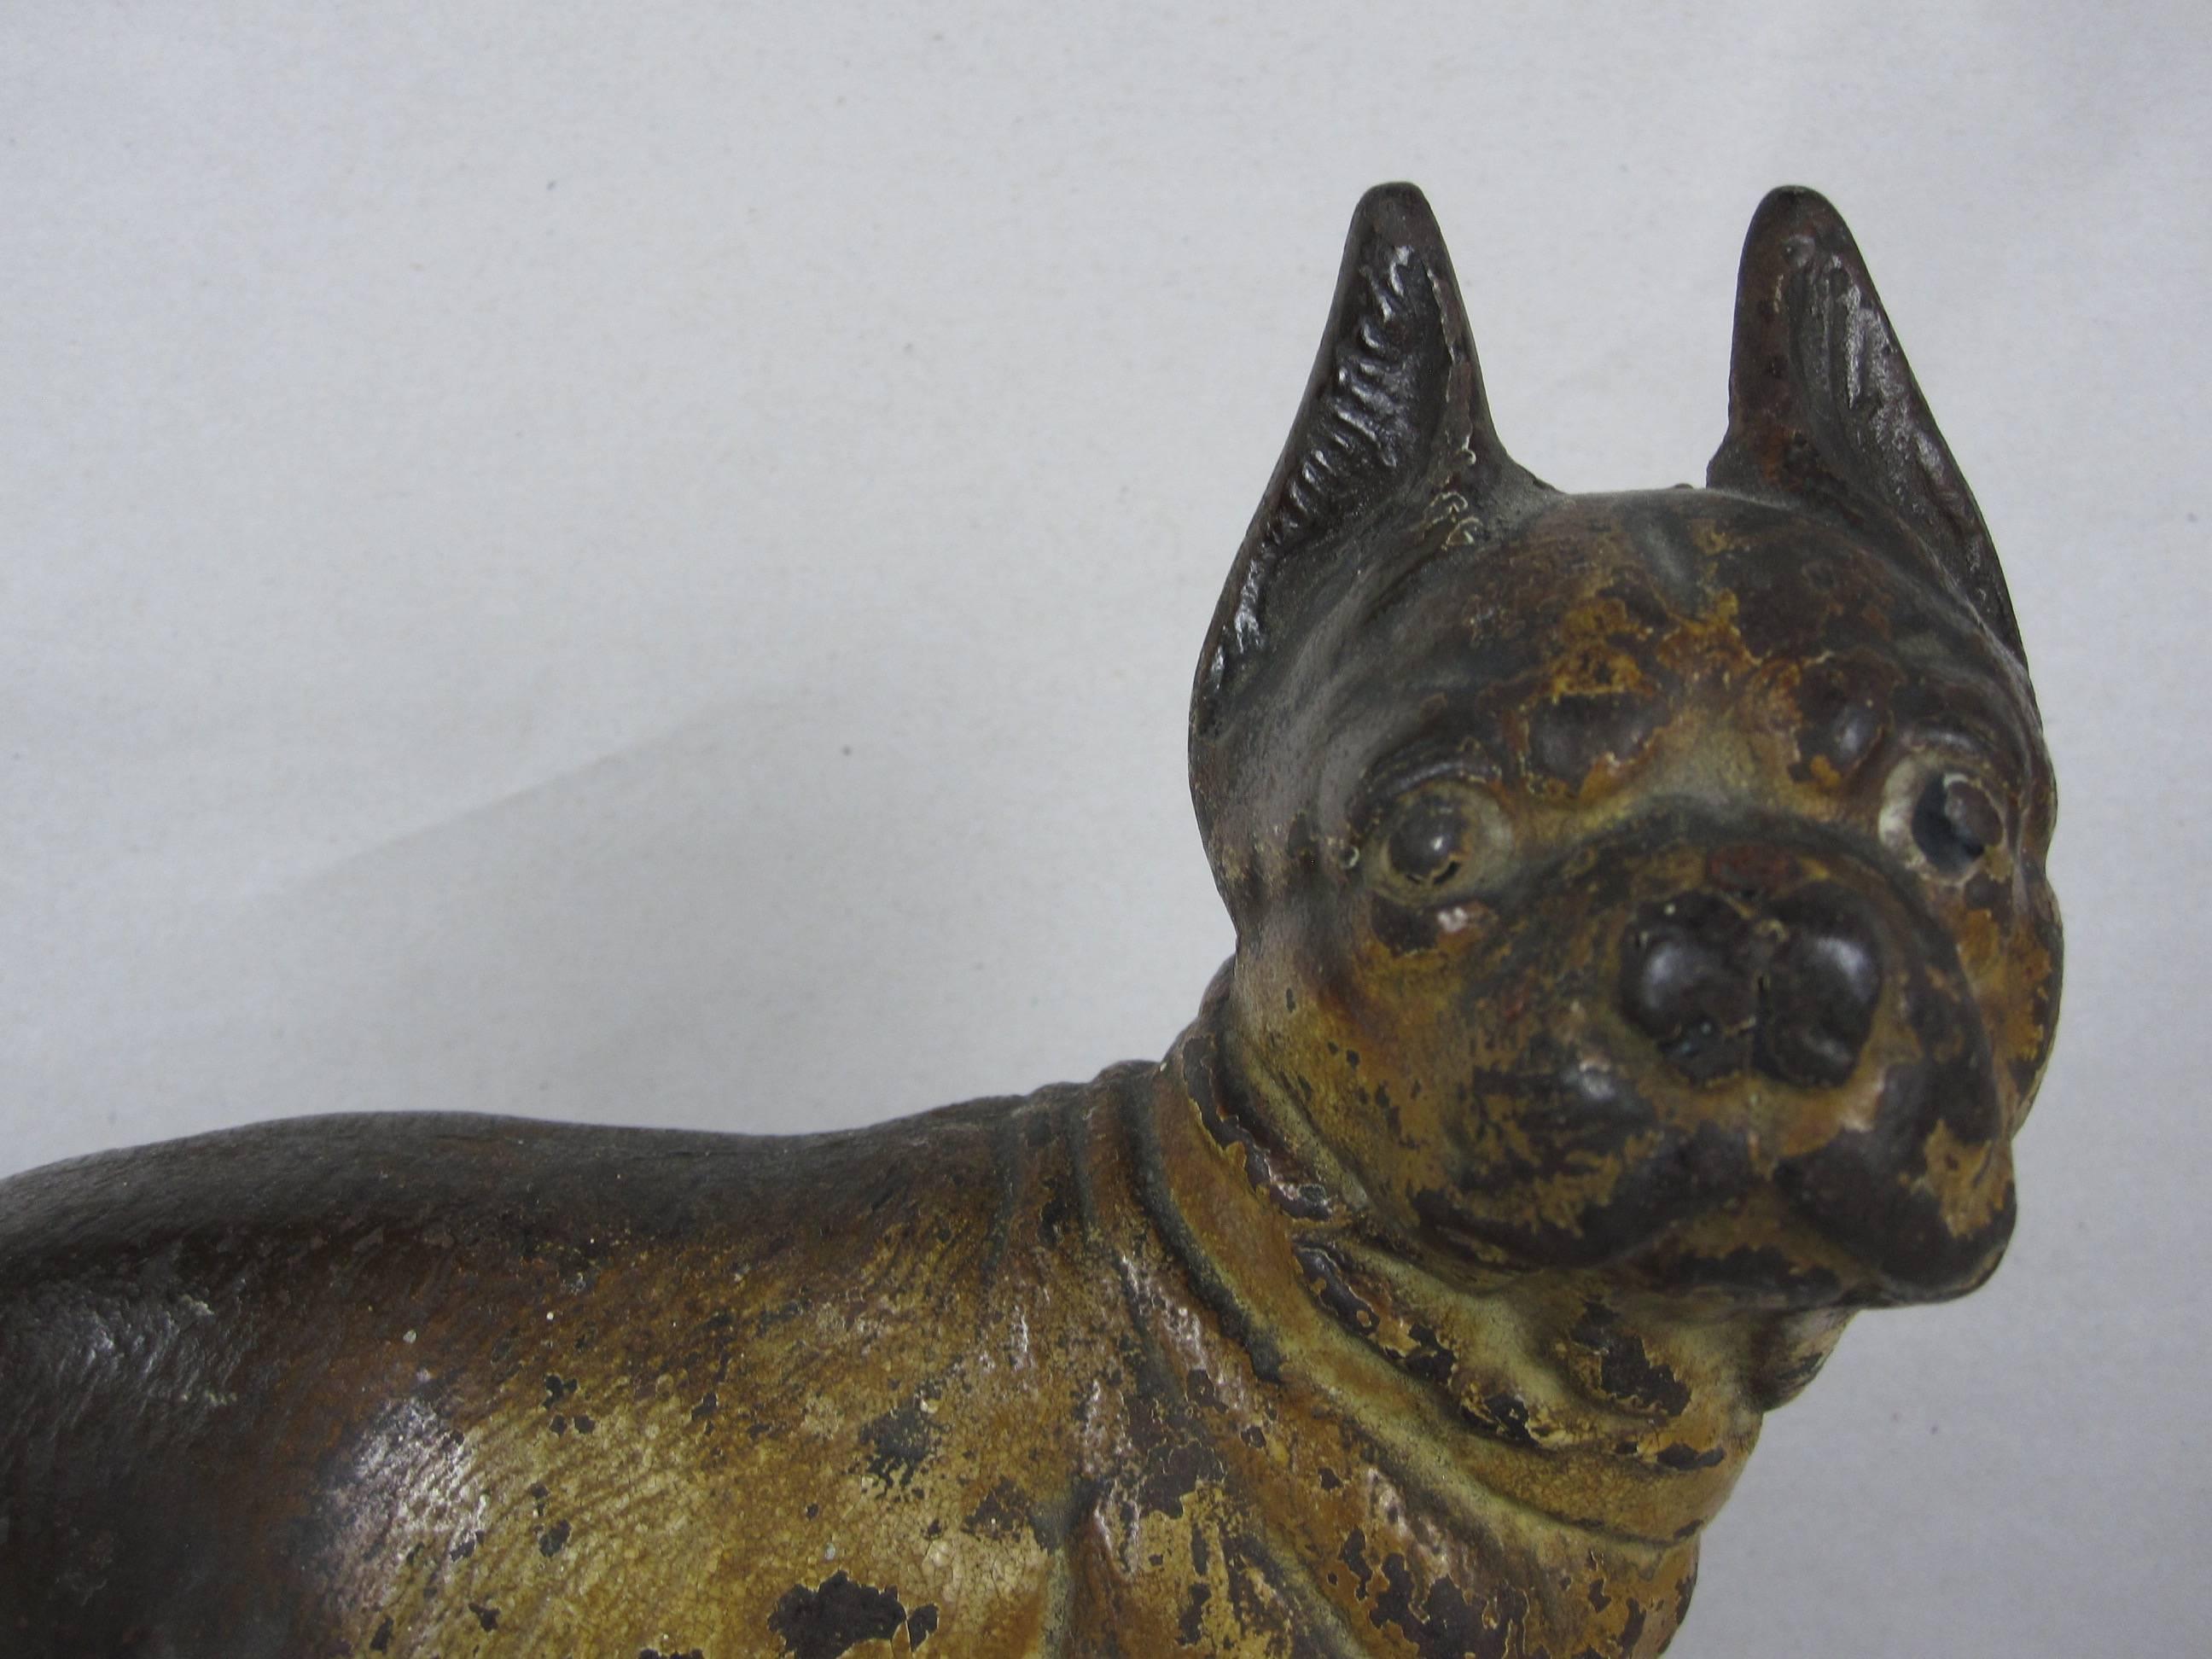 A Hubley cast iron doorstop, a French bulldog, showing the original painted finish, circa early 1900s. This form shows the true to breed stance and the great expression Hubley dogs are known for. 

The Hubley Manufacturing Company was first